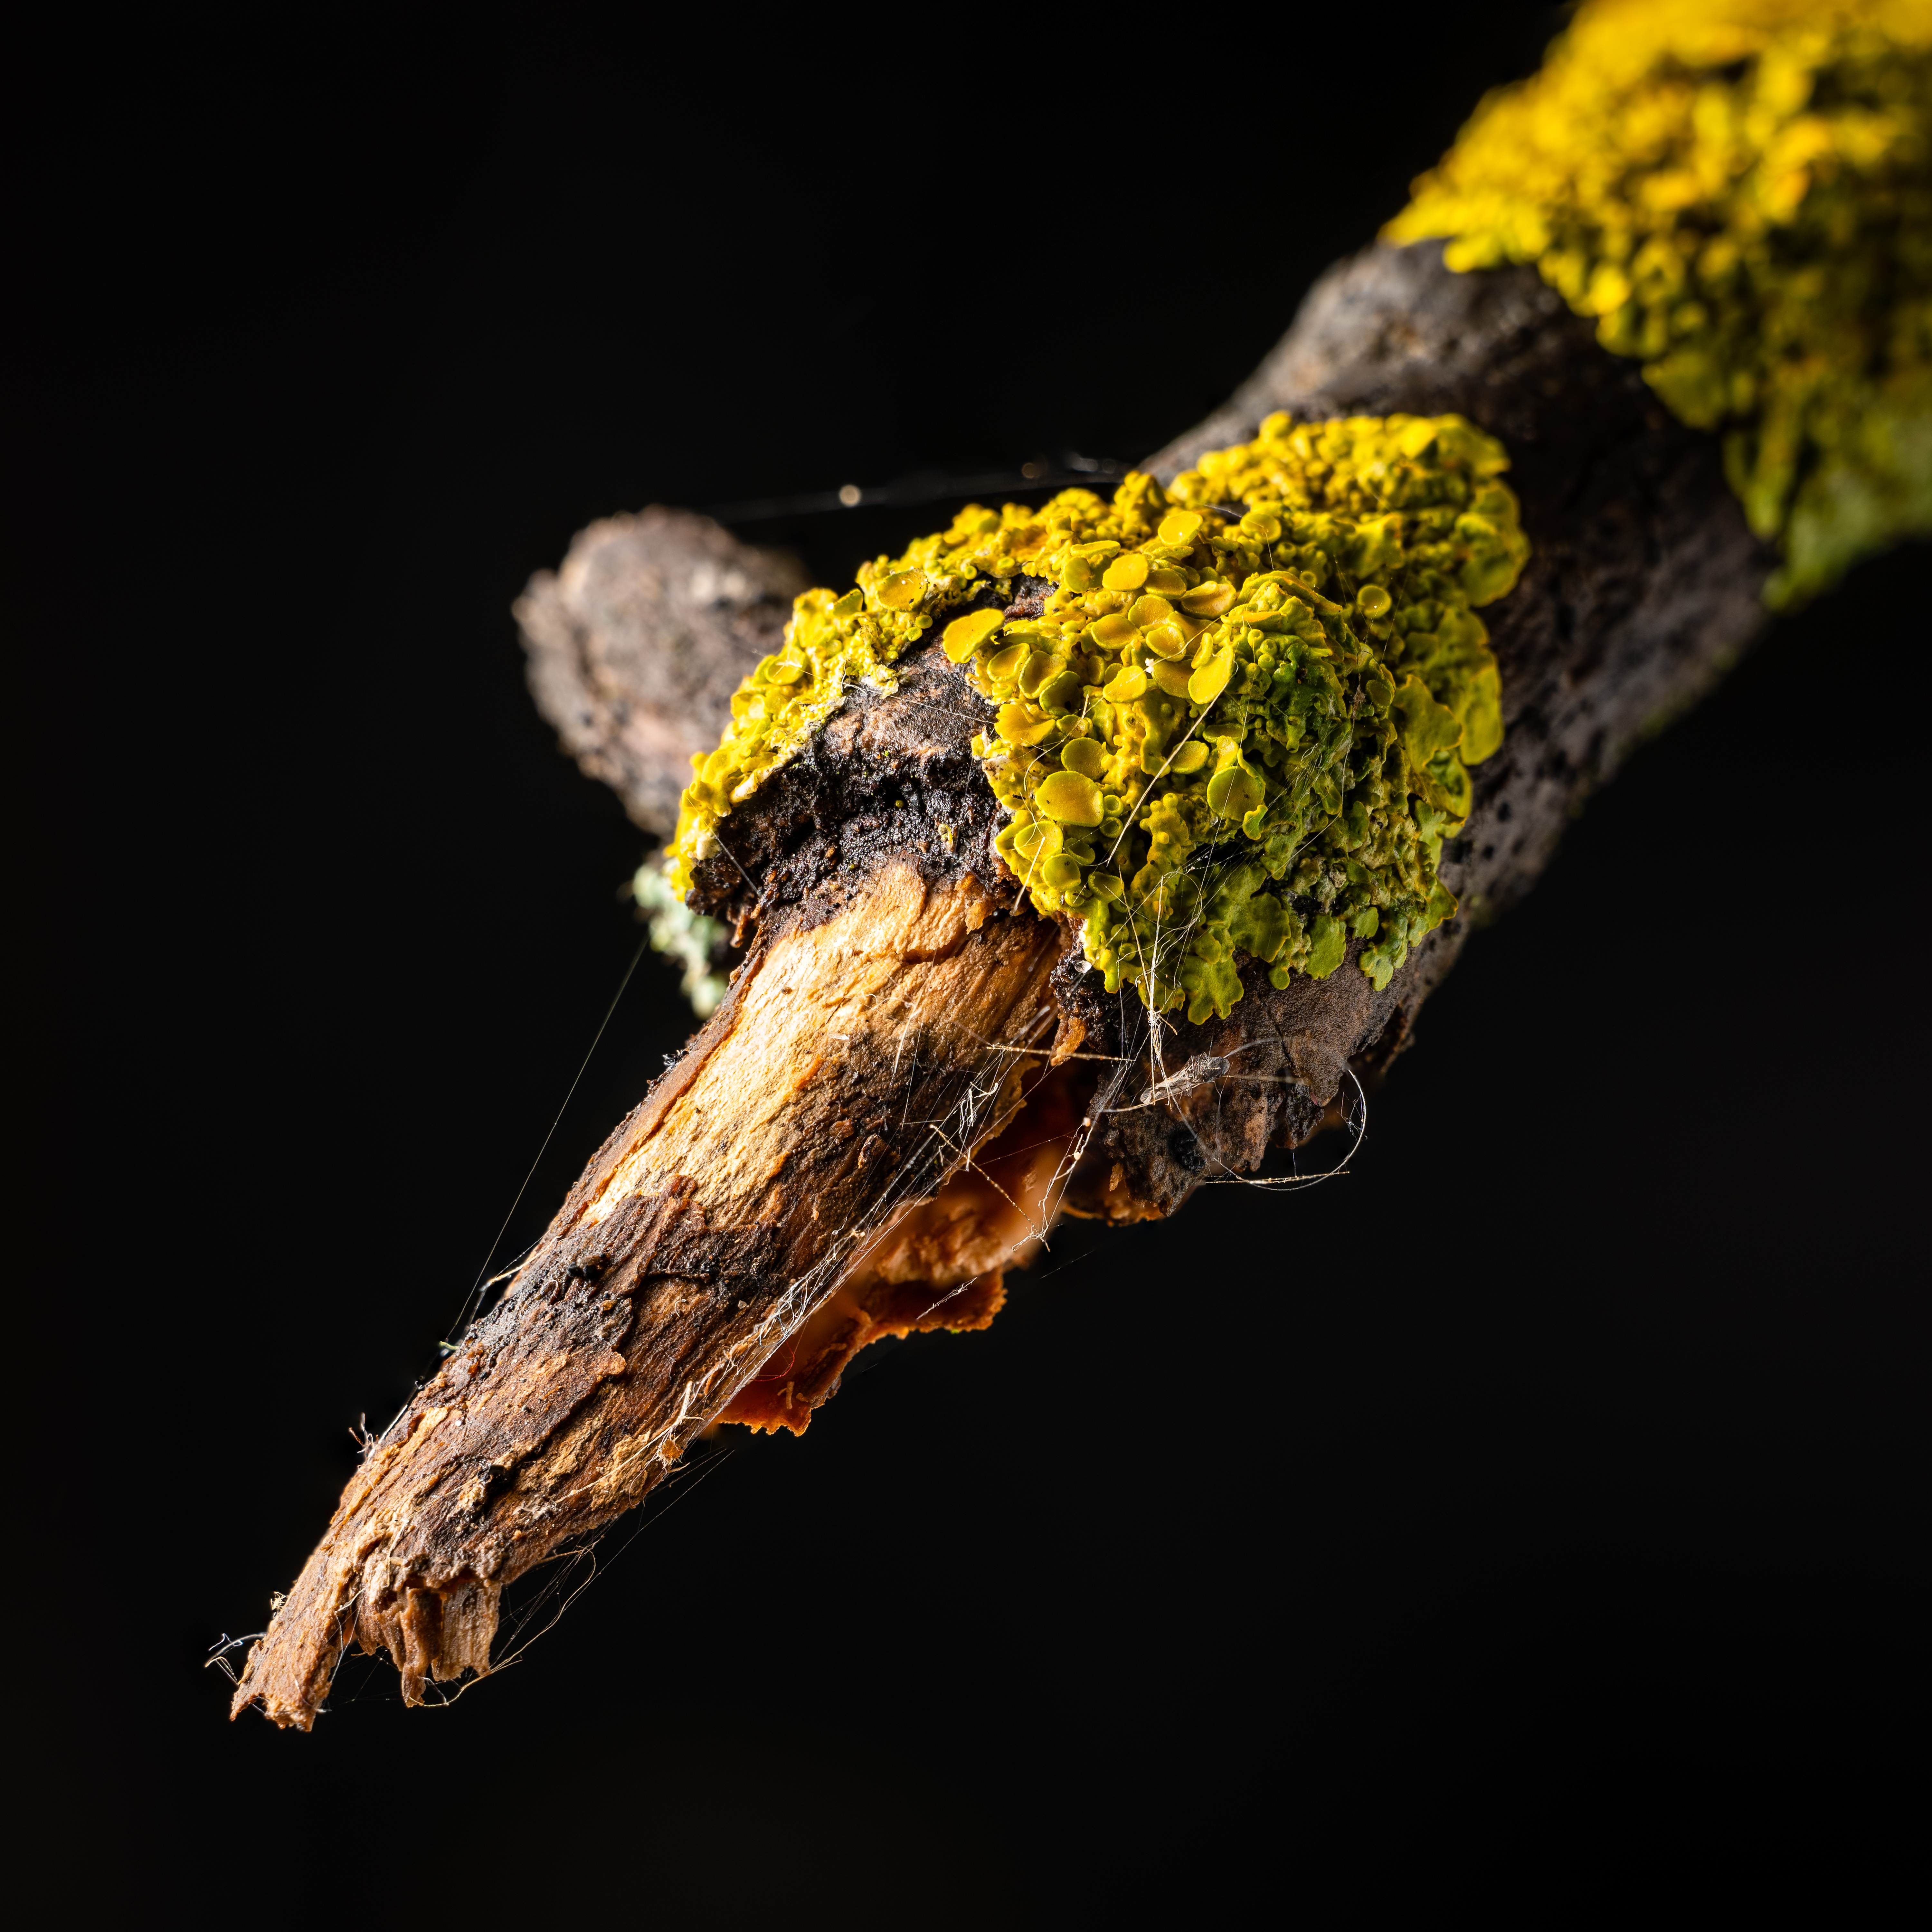 Close up detail photo of broken stick with green moss and spiderwebs, black background